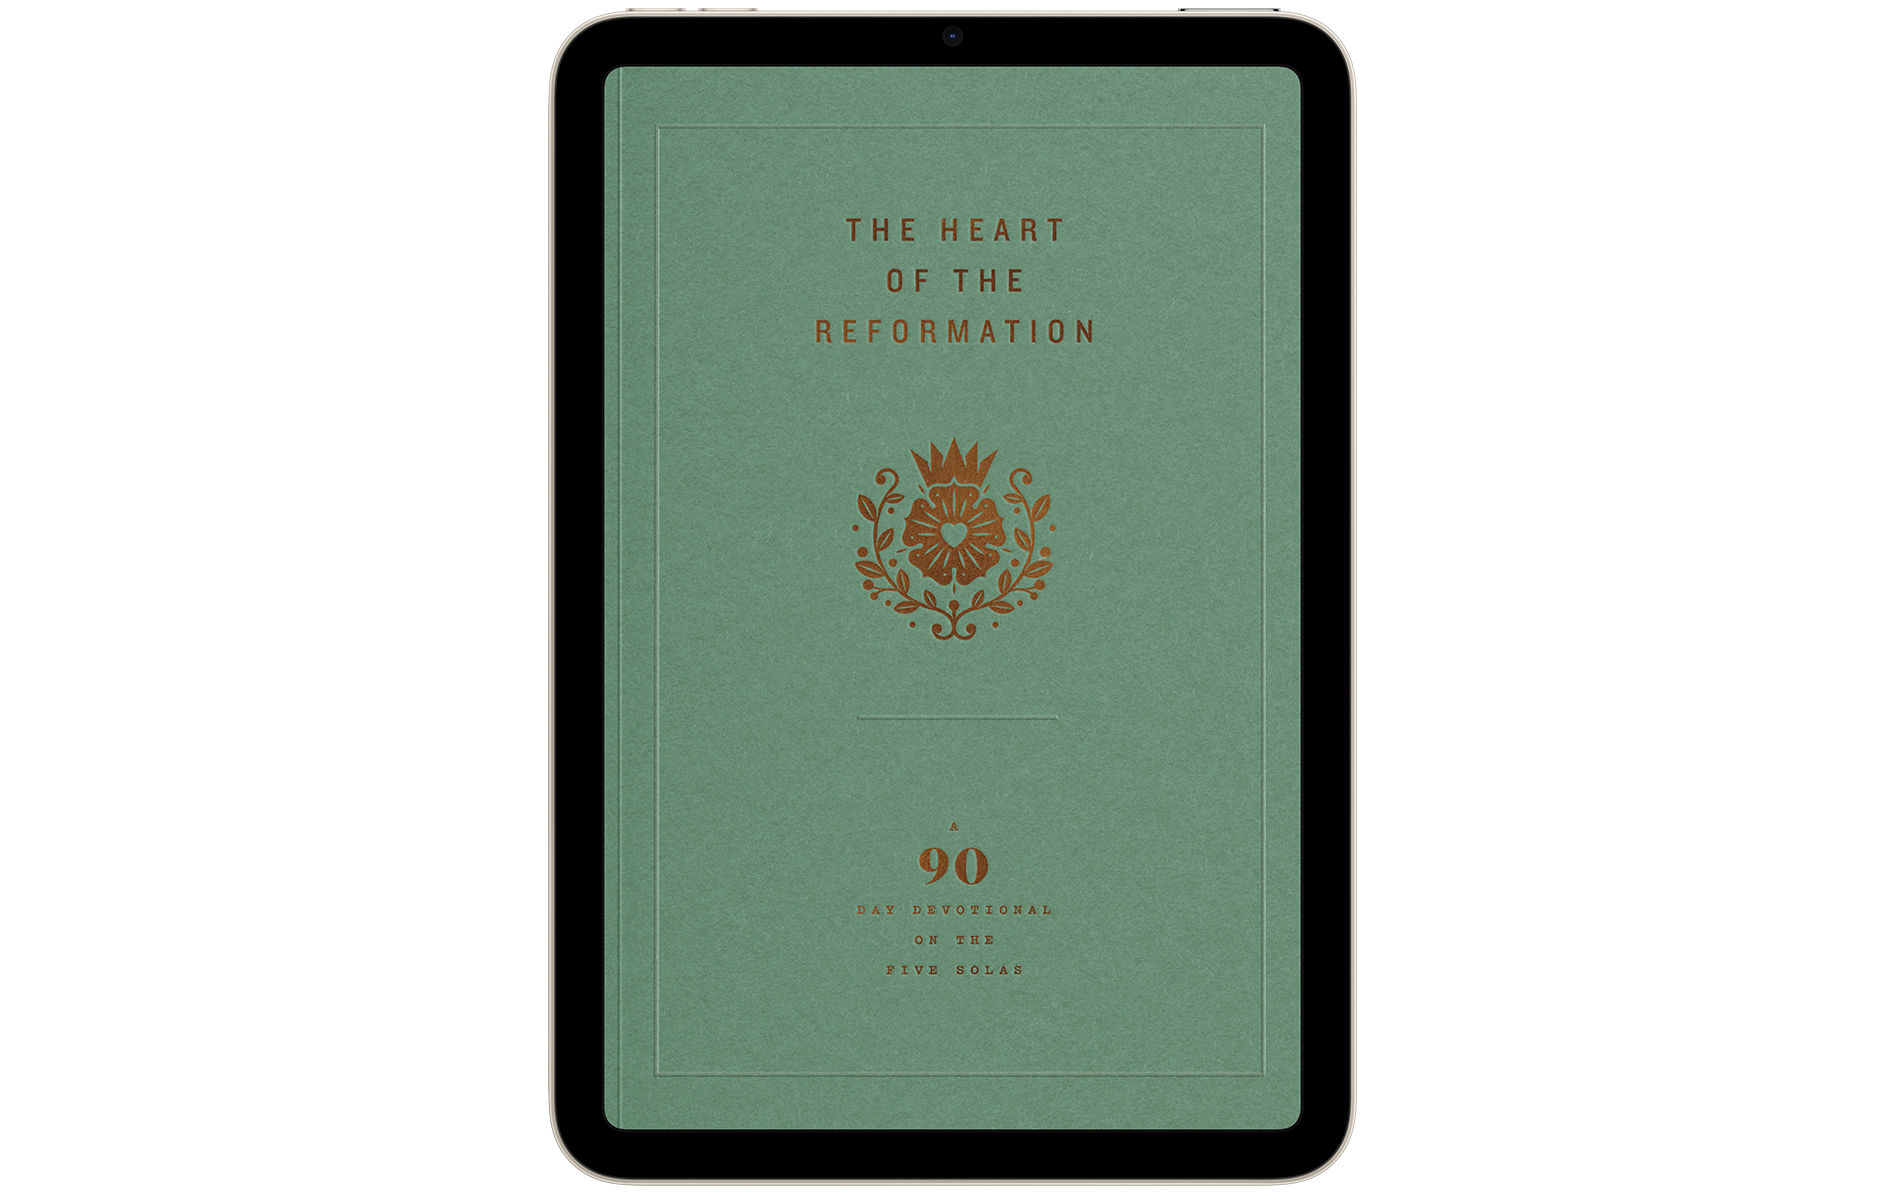 The Heart of the Reformation: A 90-Day Devotional on the Five Solas